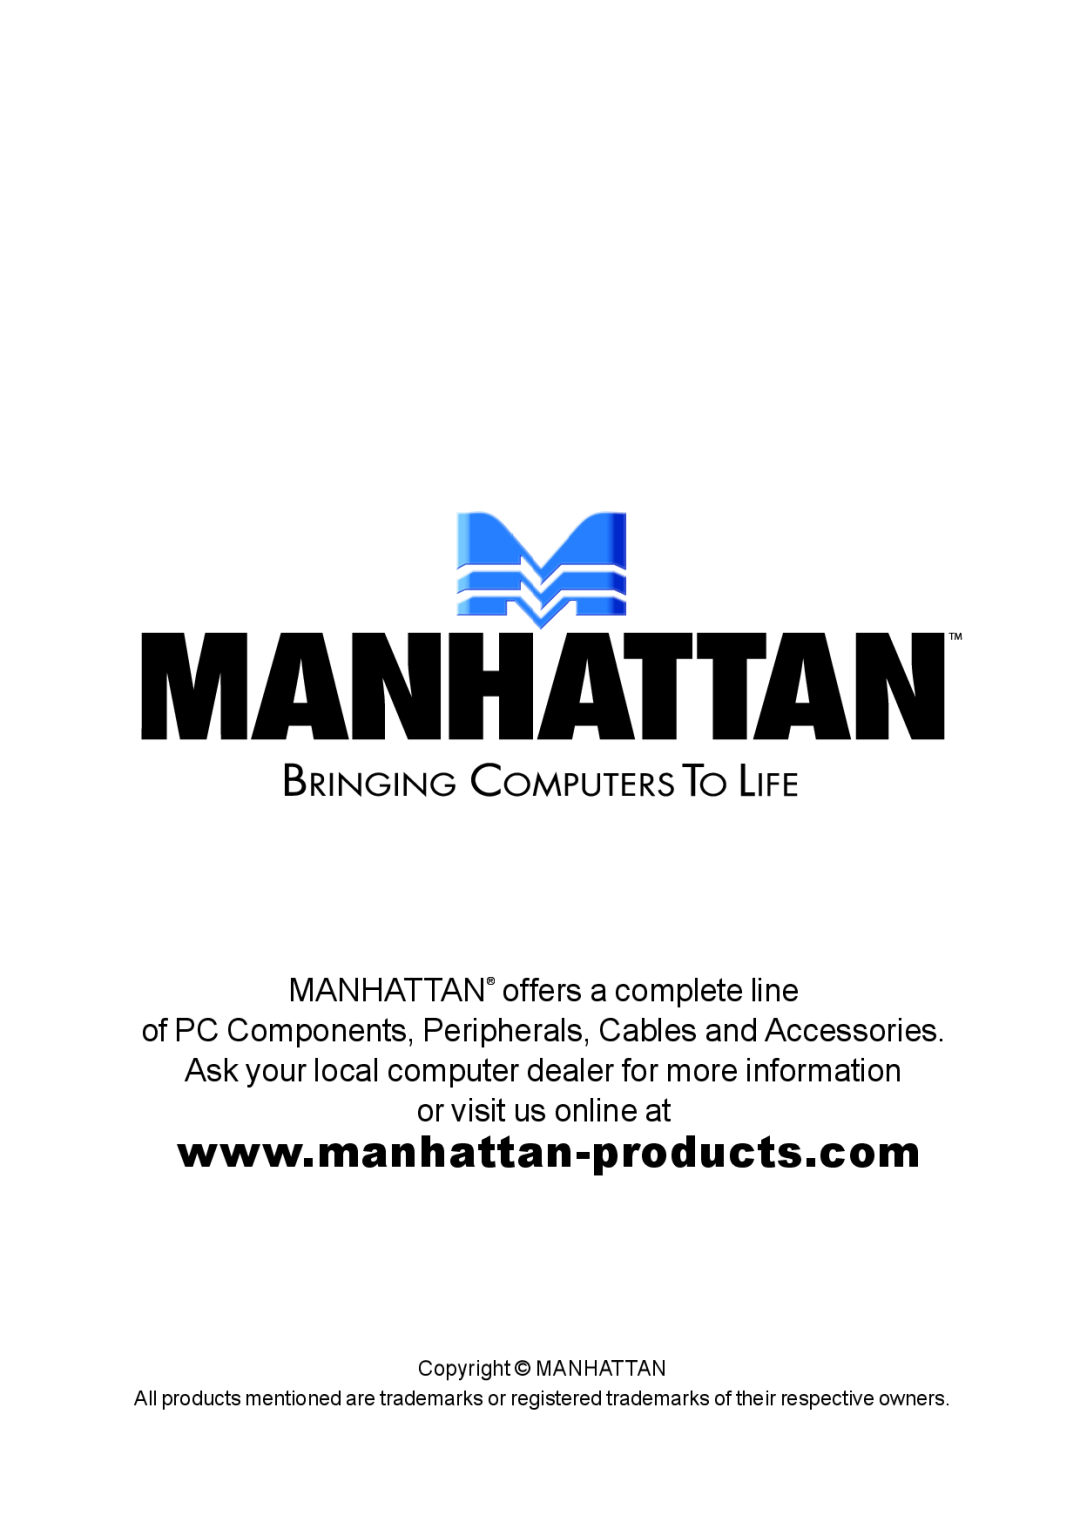 Manhattan Computer Products 160766 MANHATTAN offers a complete line, of PC Components, Peripherals, Cables and Accessories 